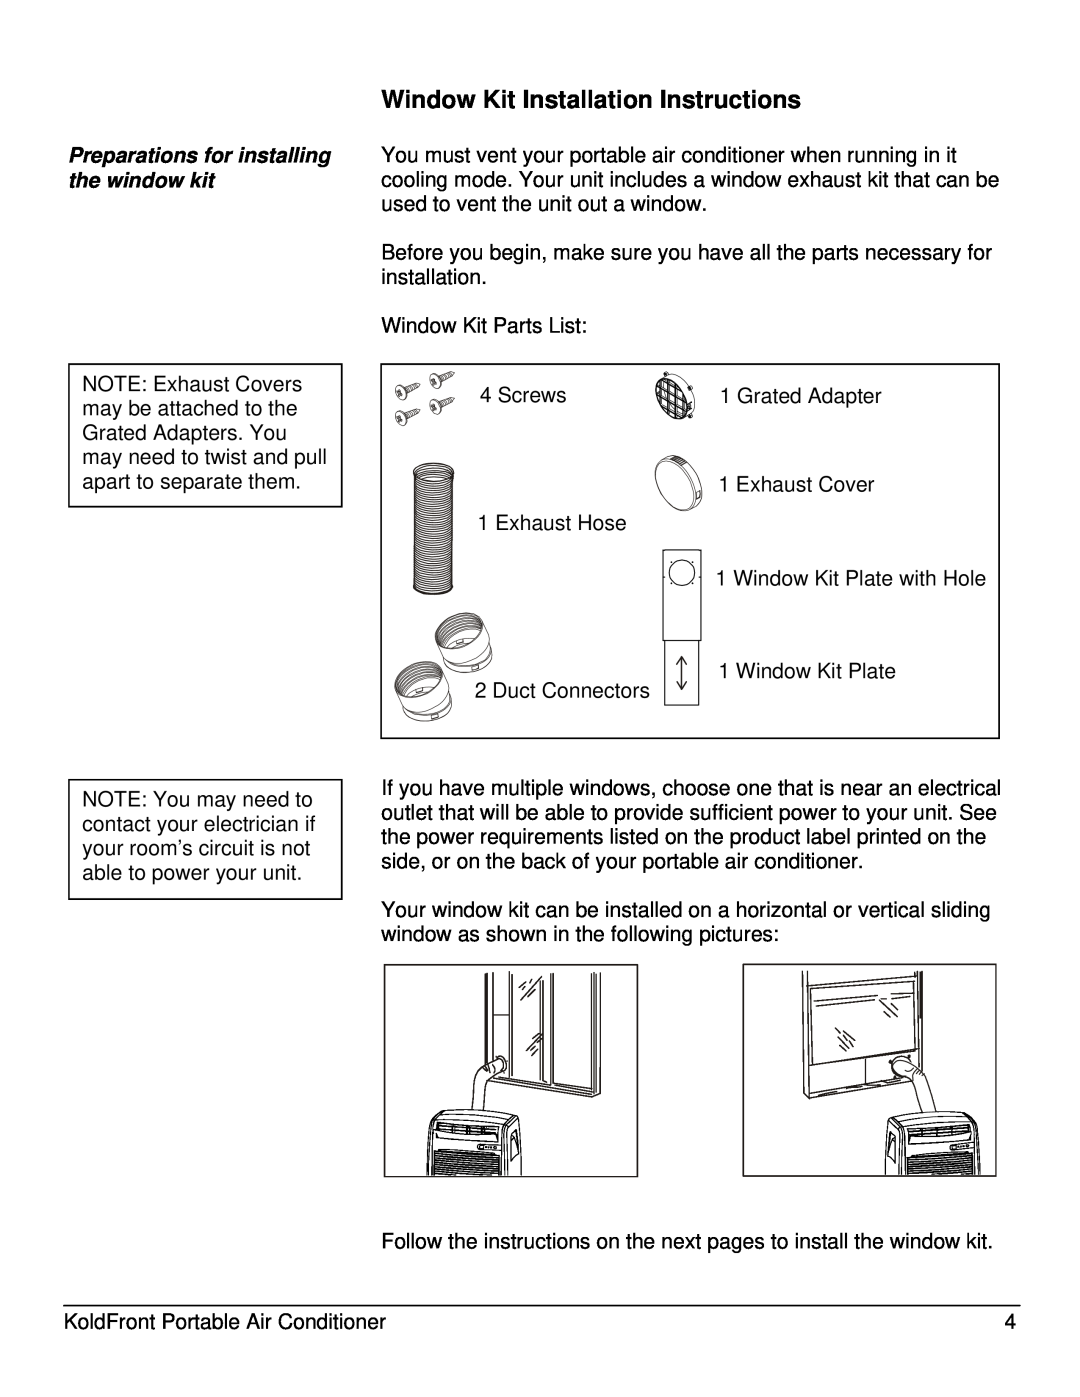 KoldFront PAC8000S owner manual Window Kit Installation Instructions, Preparations for installing the window kit 